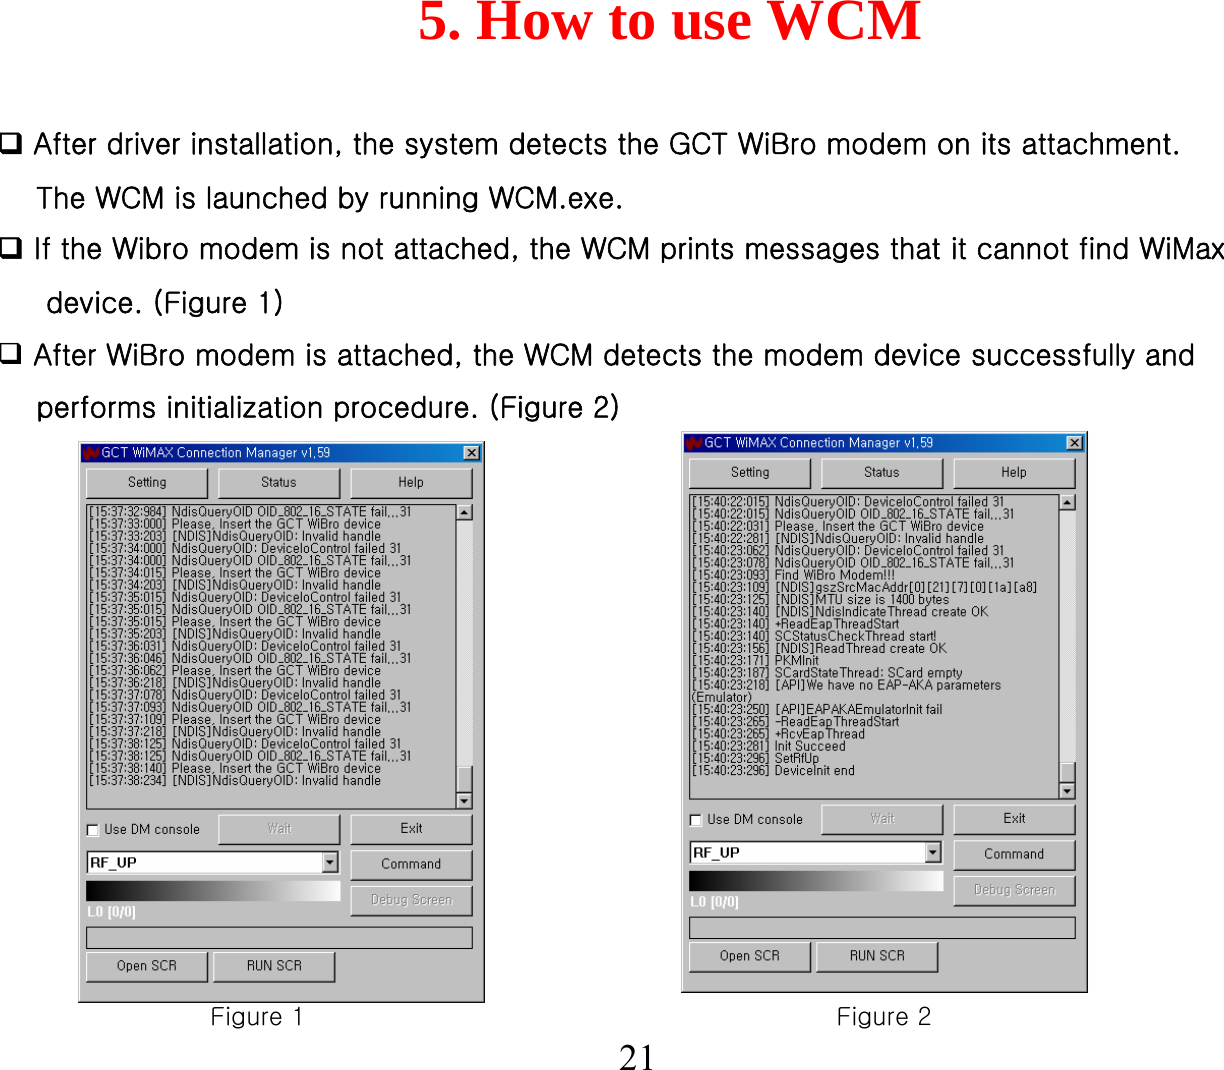 5. How to use WCM21After driver installation, the system detects the GCT WiBro modem on its attachment. The WCM is launched by running WCM.exe.If the Wibro modem is not attached, the WCM prints messages that it cannot find WiMaxdevice. (Figure 1)After WiBro modem is attached, the WCM detects the modem device successfully and performs initialization procedure. (Figure 2)Figure 1 Figure 2